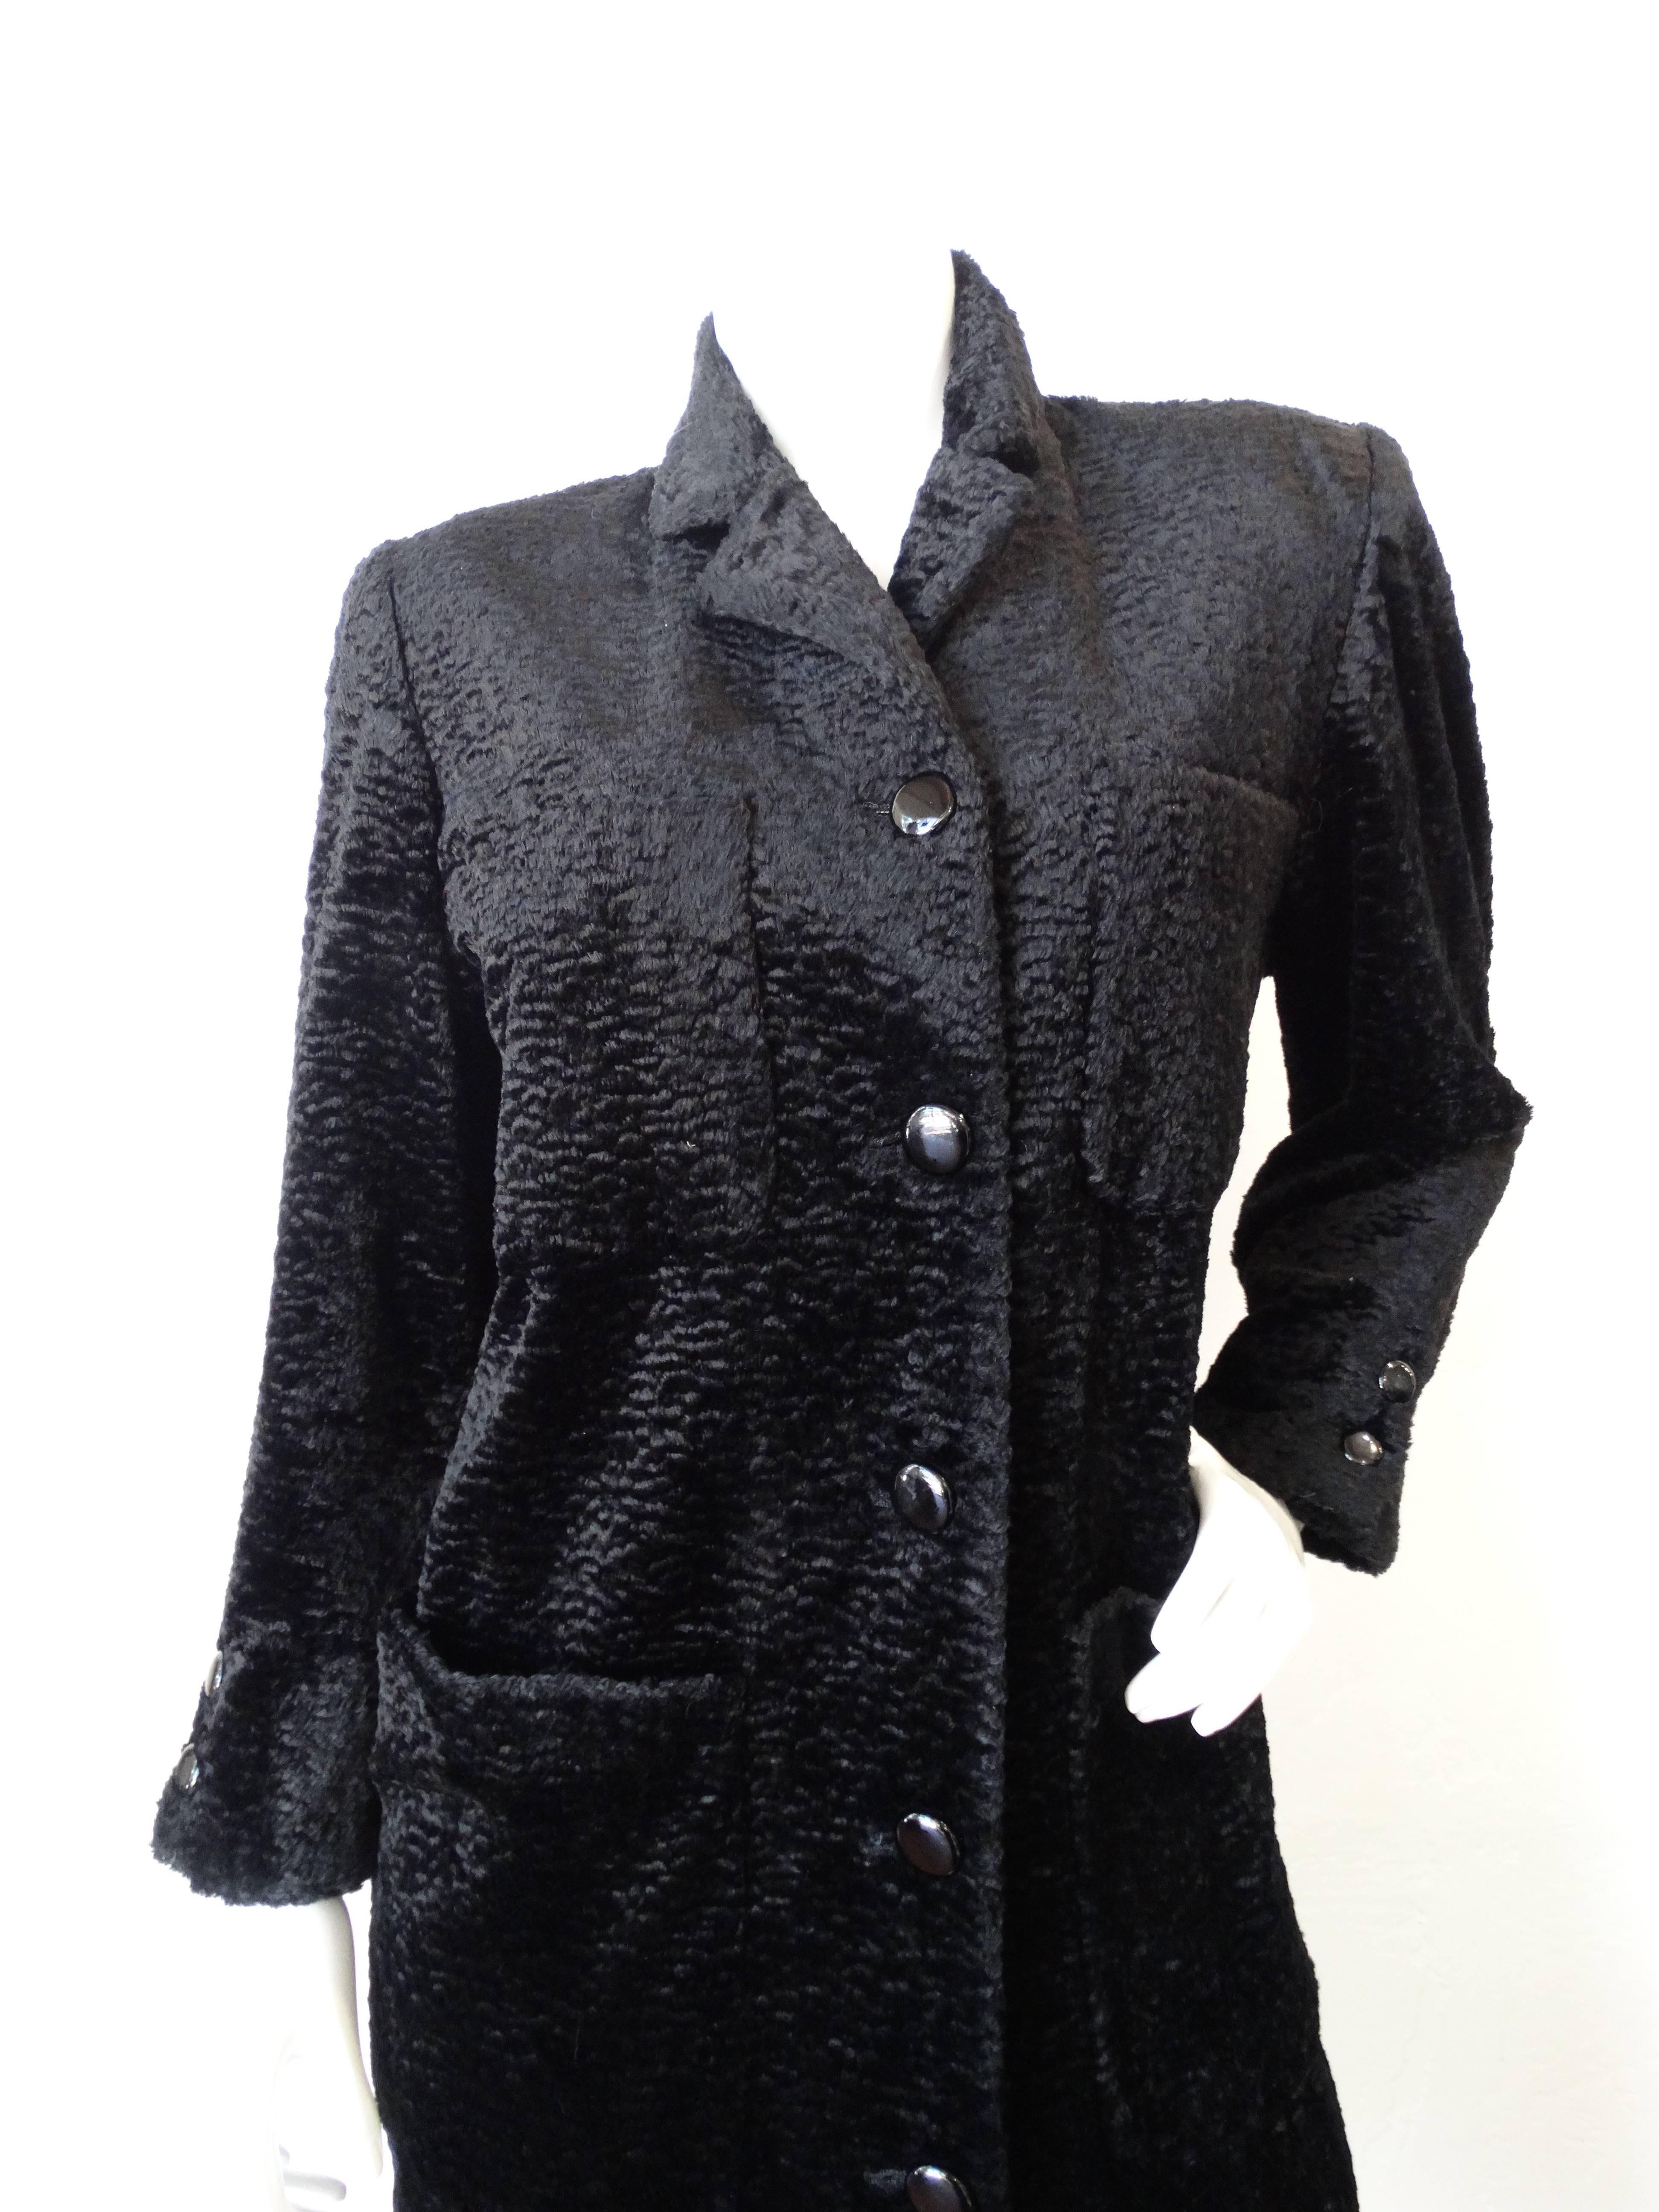 Incredible 1980s faux fur coat from iconic label Fendi 365! Made of a black sheared faux fur with black glossy buttons up the front. Two large pockets on the bust and two pockets at either side of the hip. Fold over collar, buttons on the cuffs.